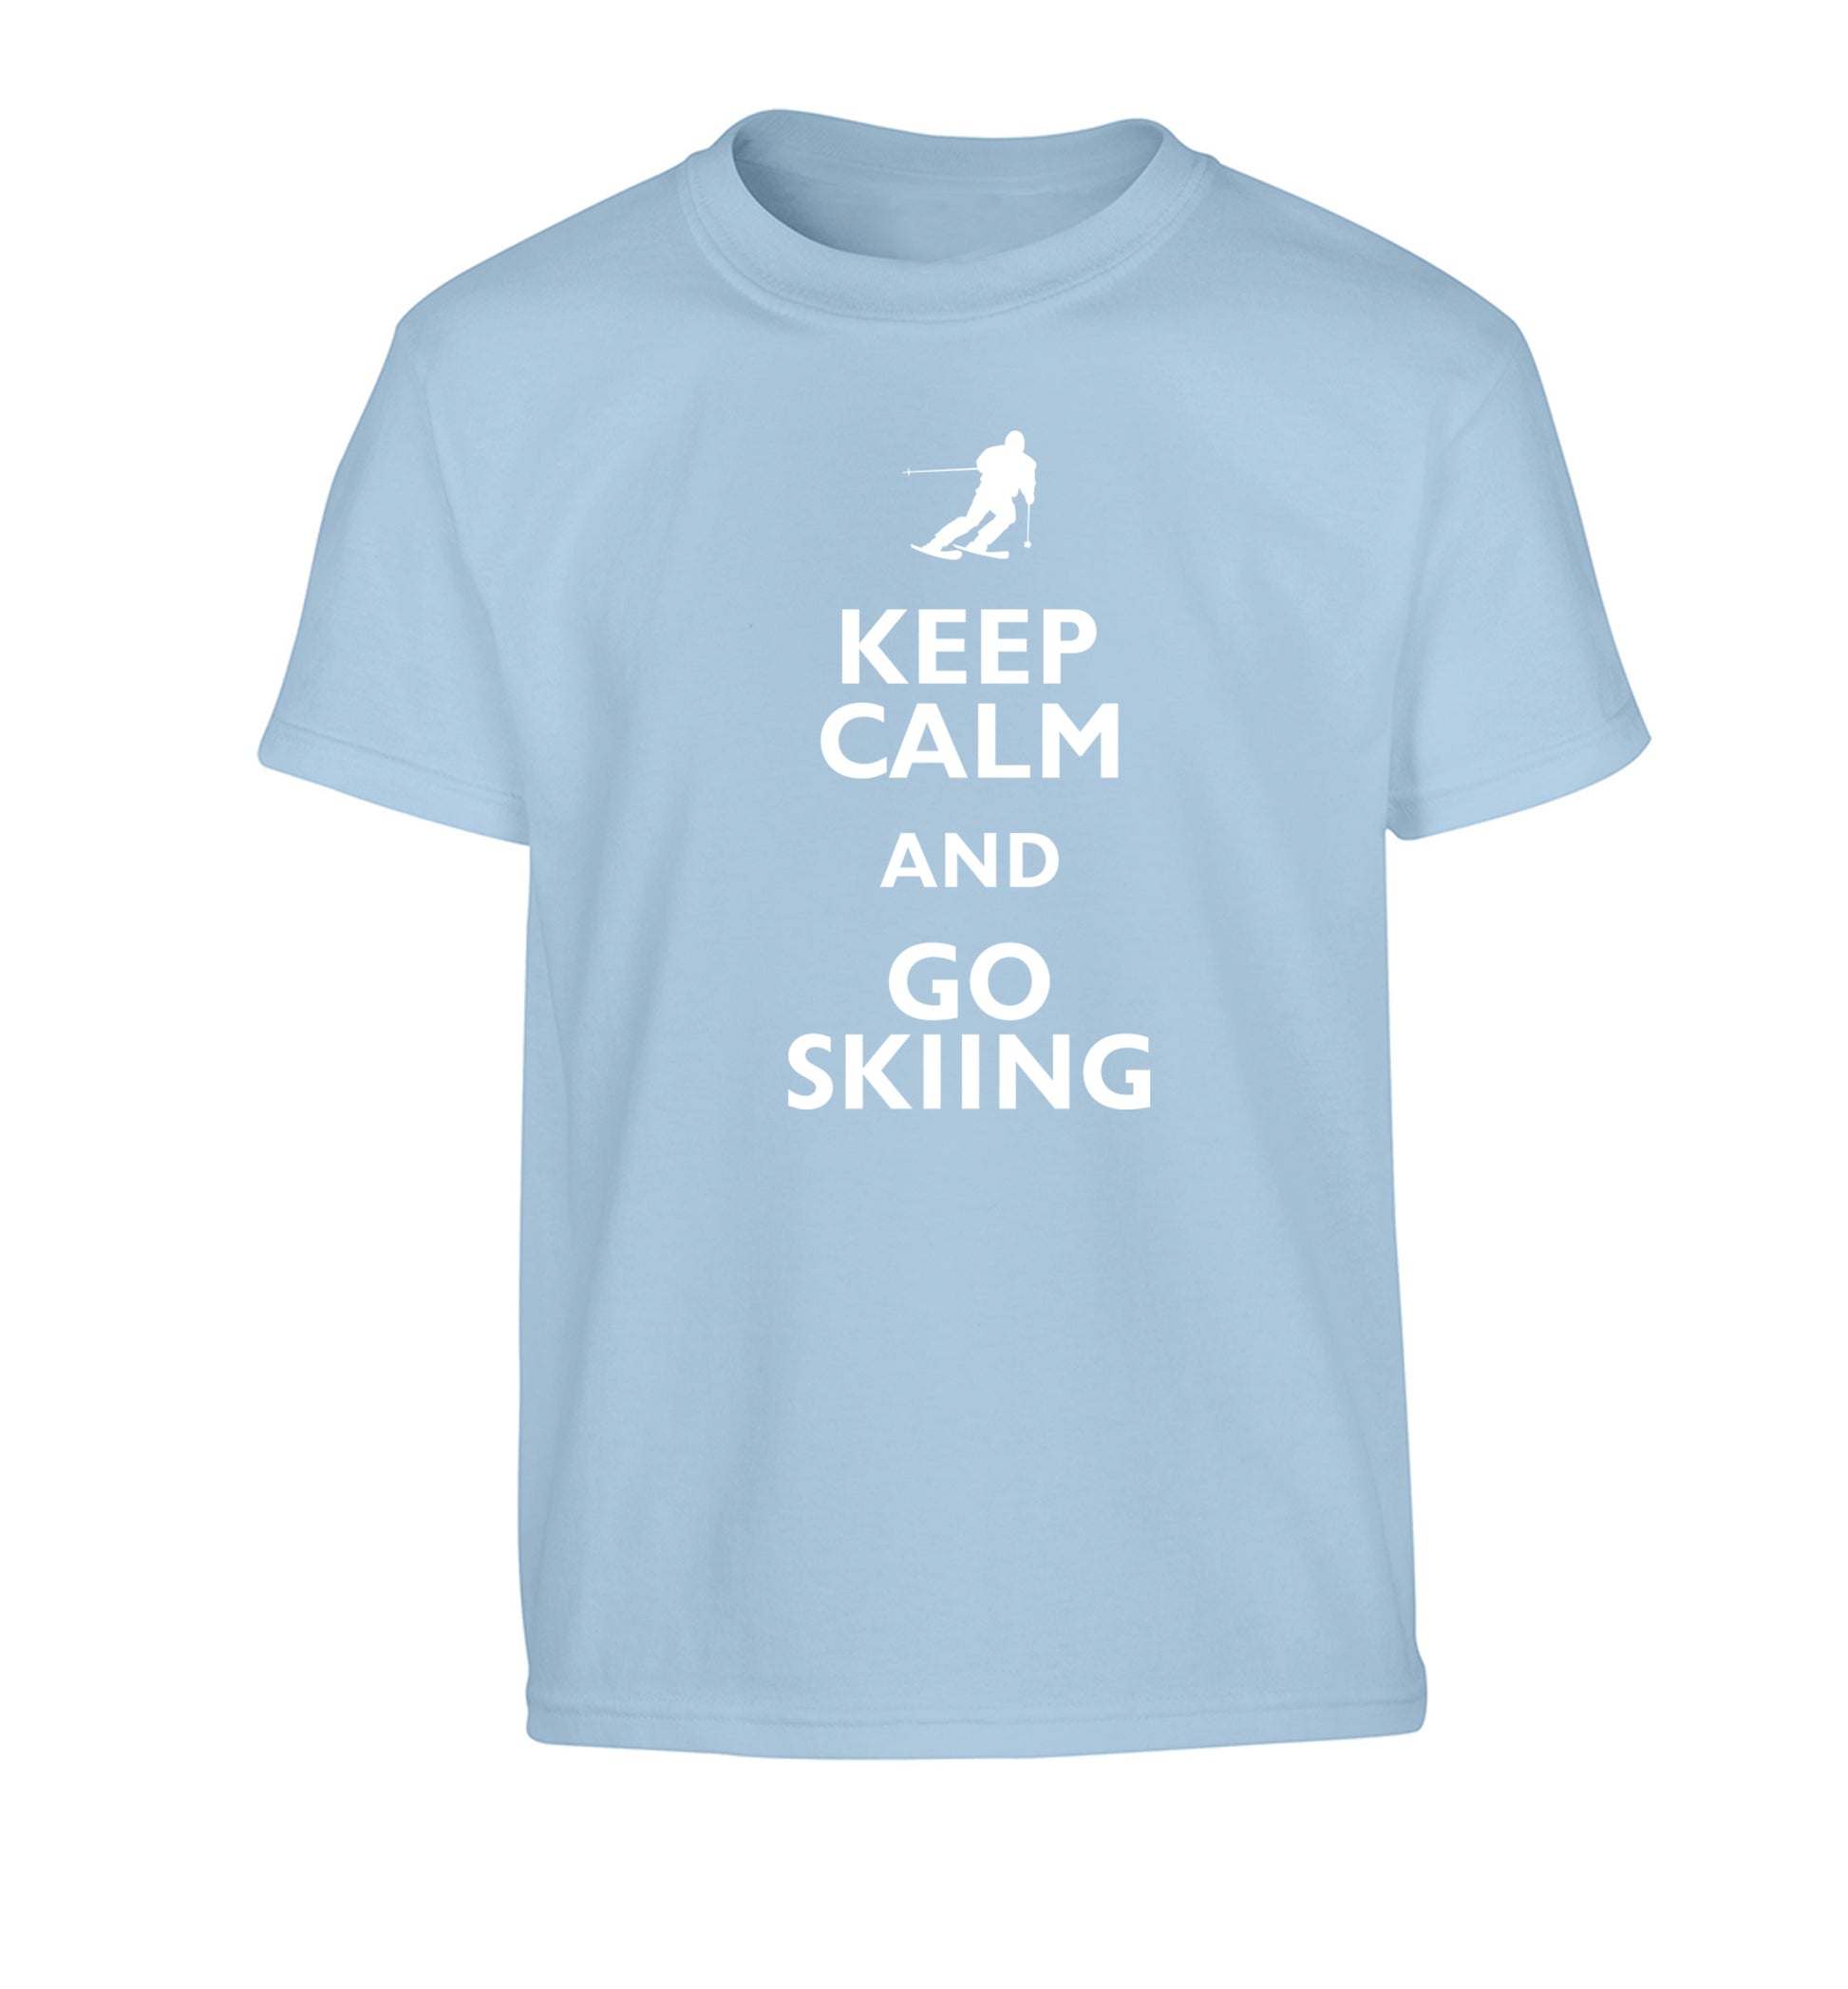 Keep calm and go skiing Children's light blue Tshirt 12-14 Years